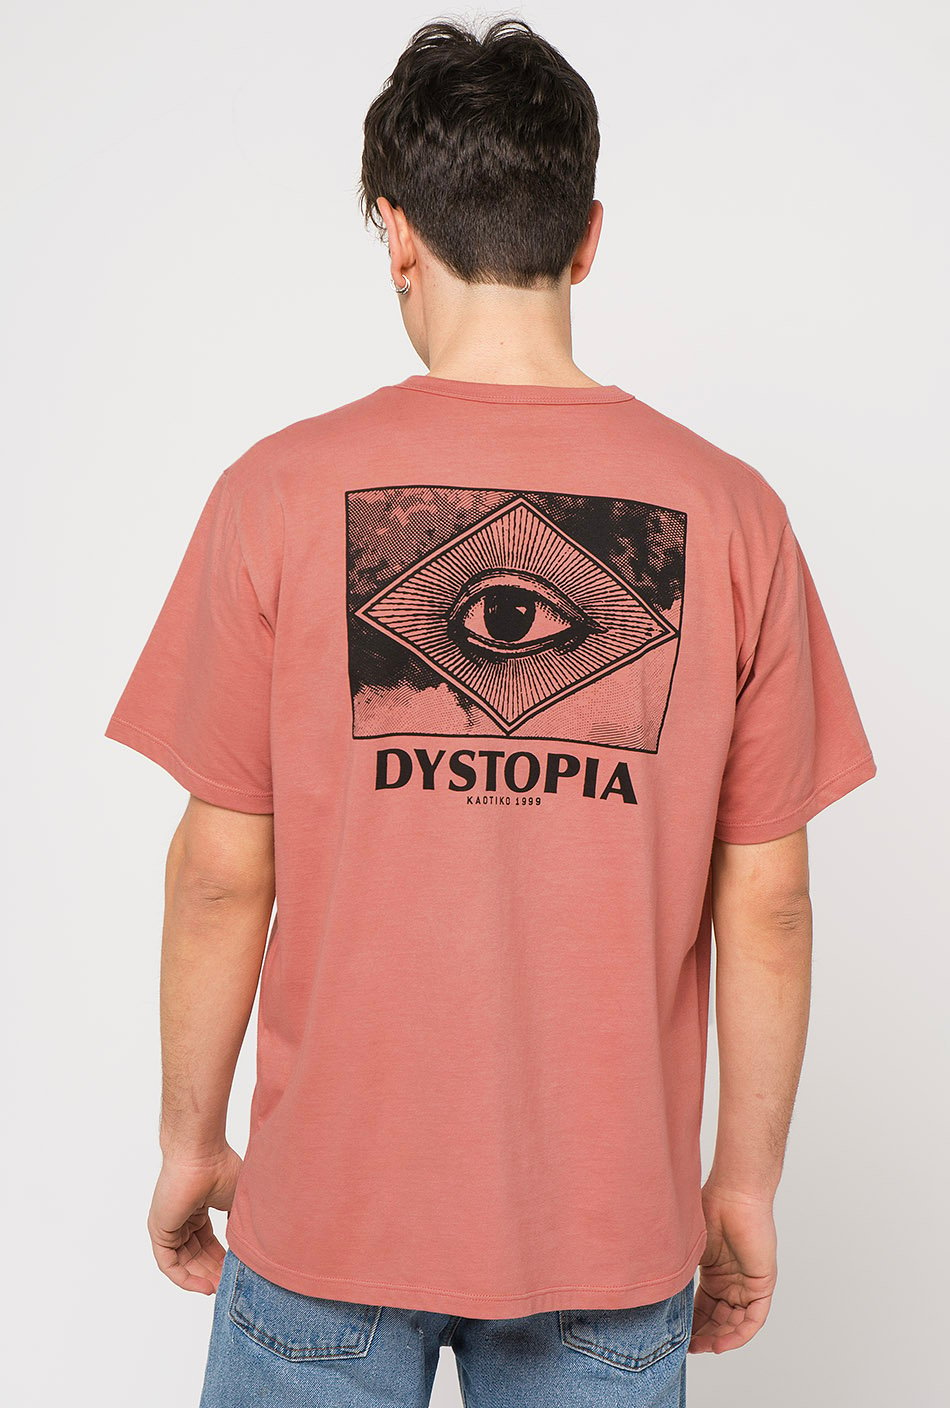 Dystopia T-Shirt in Lachsrot